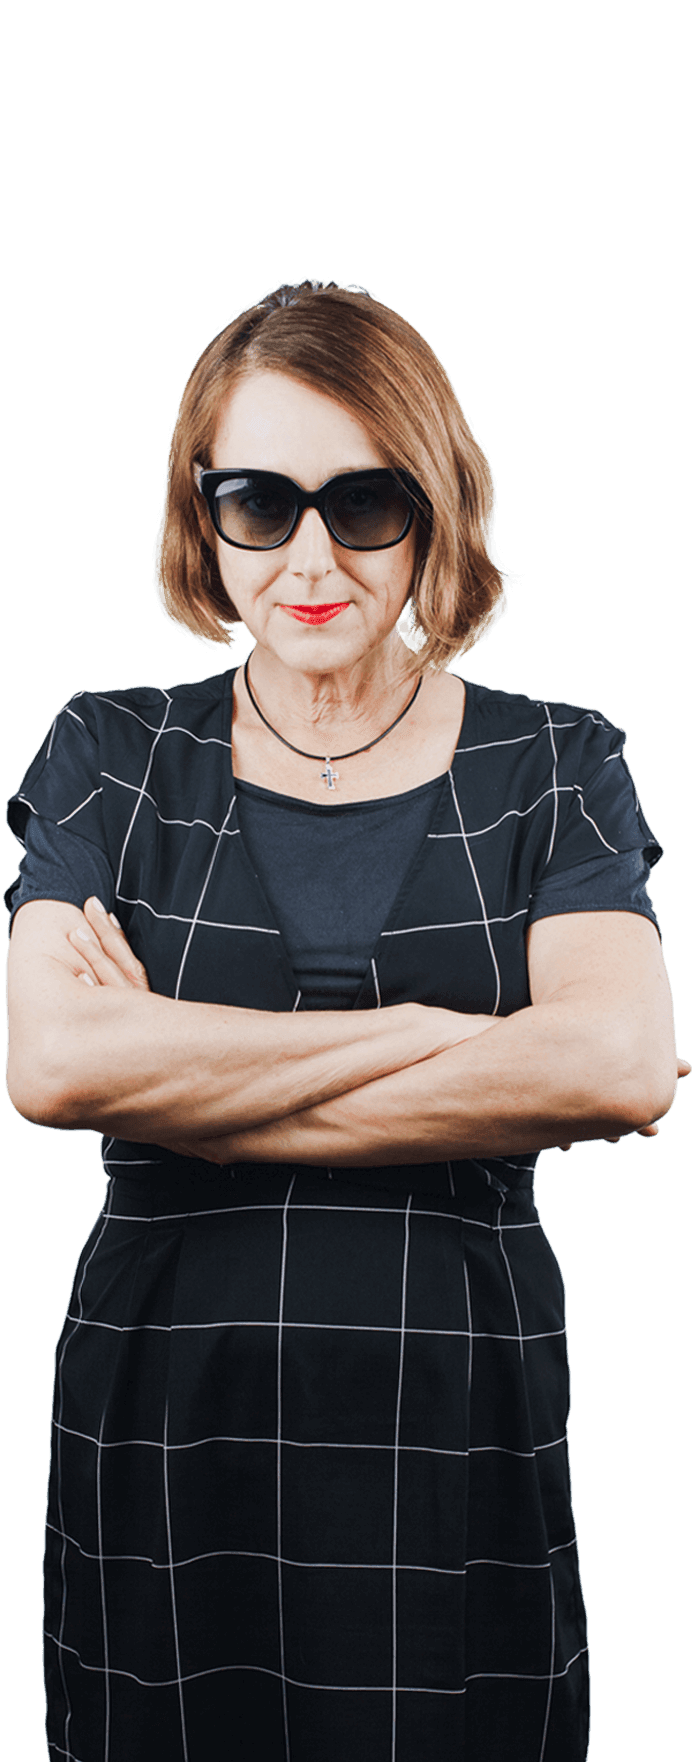 A serious looking Caucasian woman in her 50's with honey brown hair colour wearing sunglasses and grid dress